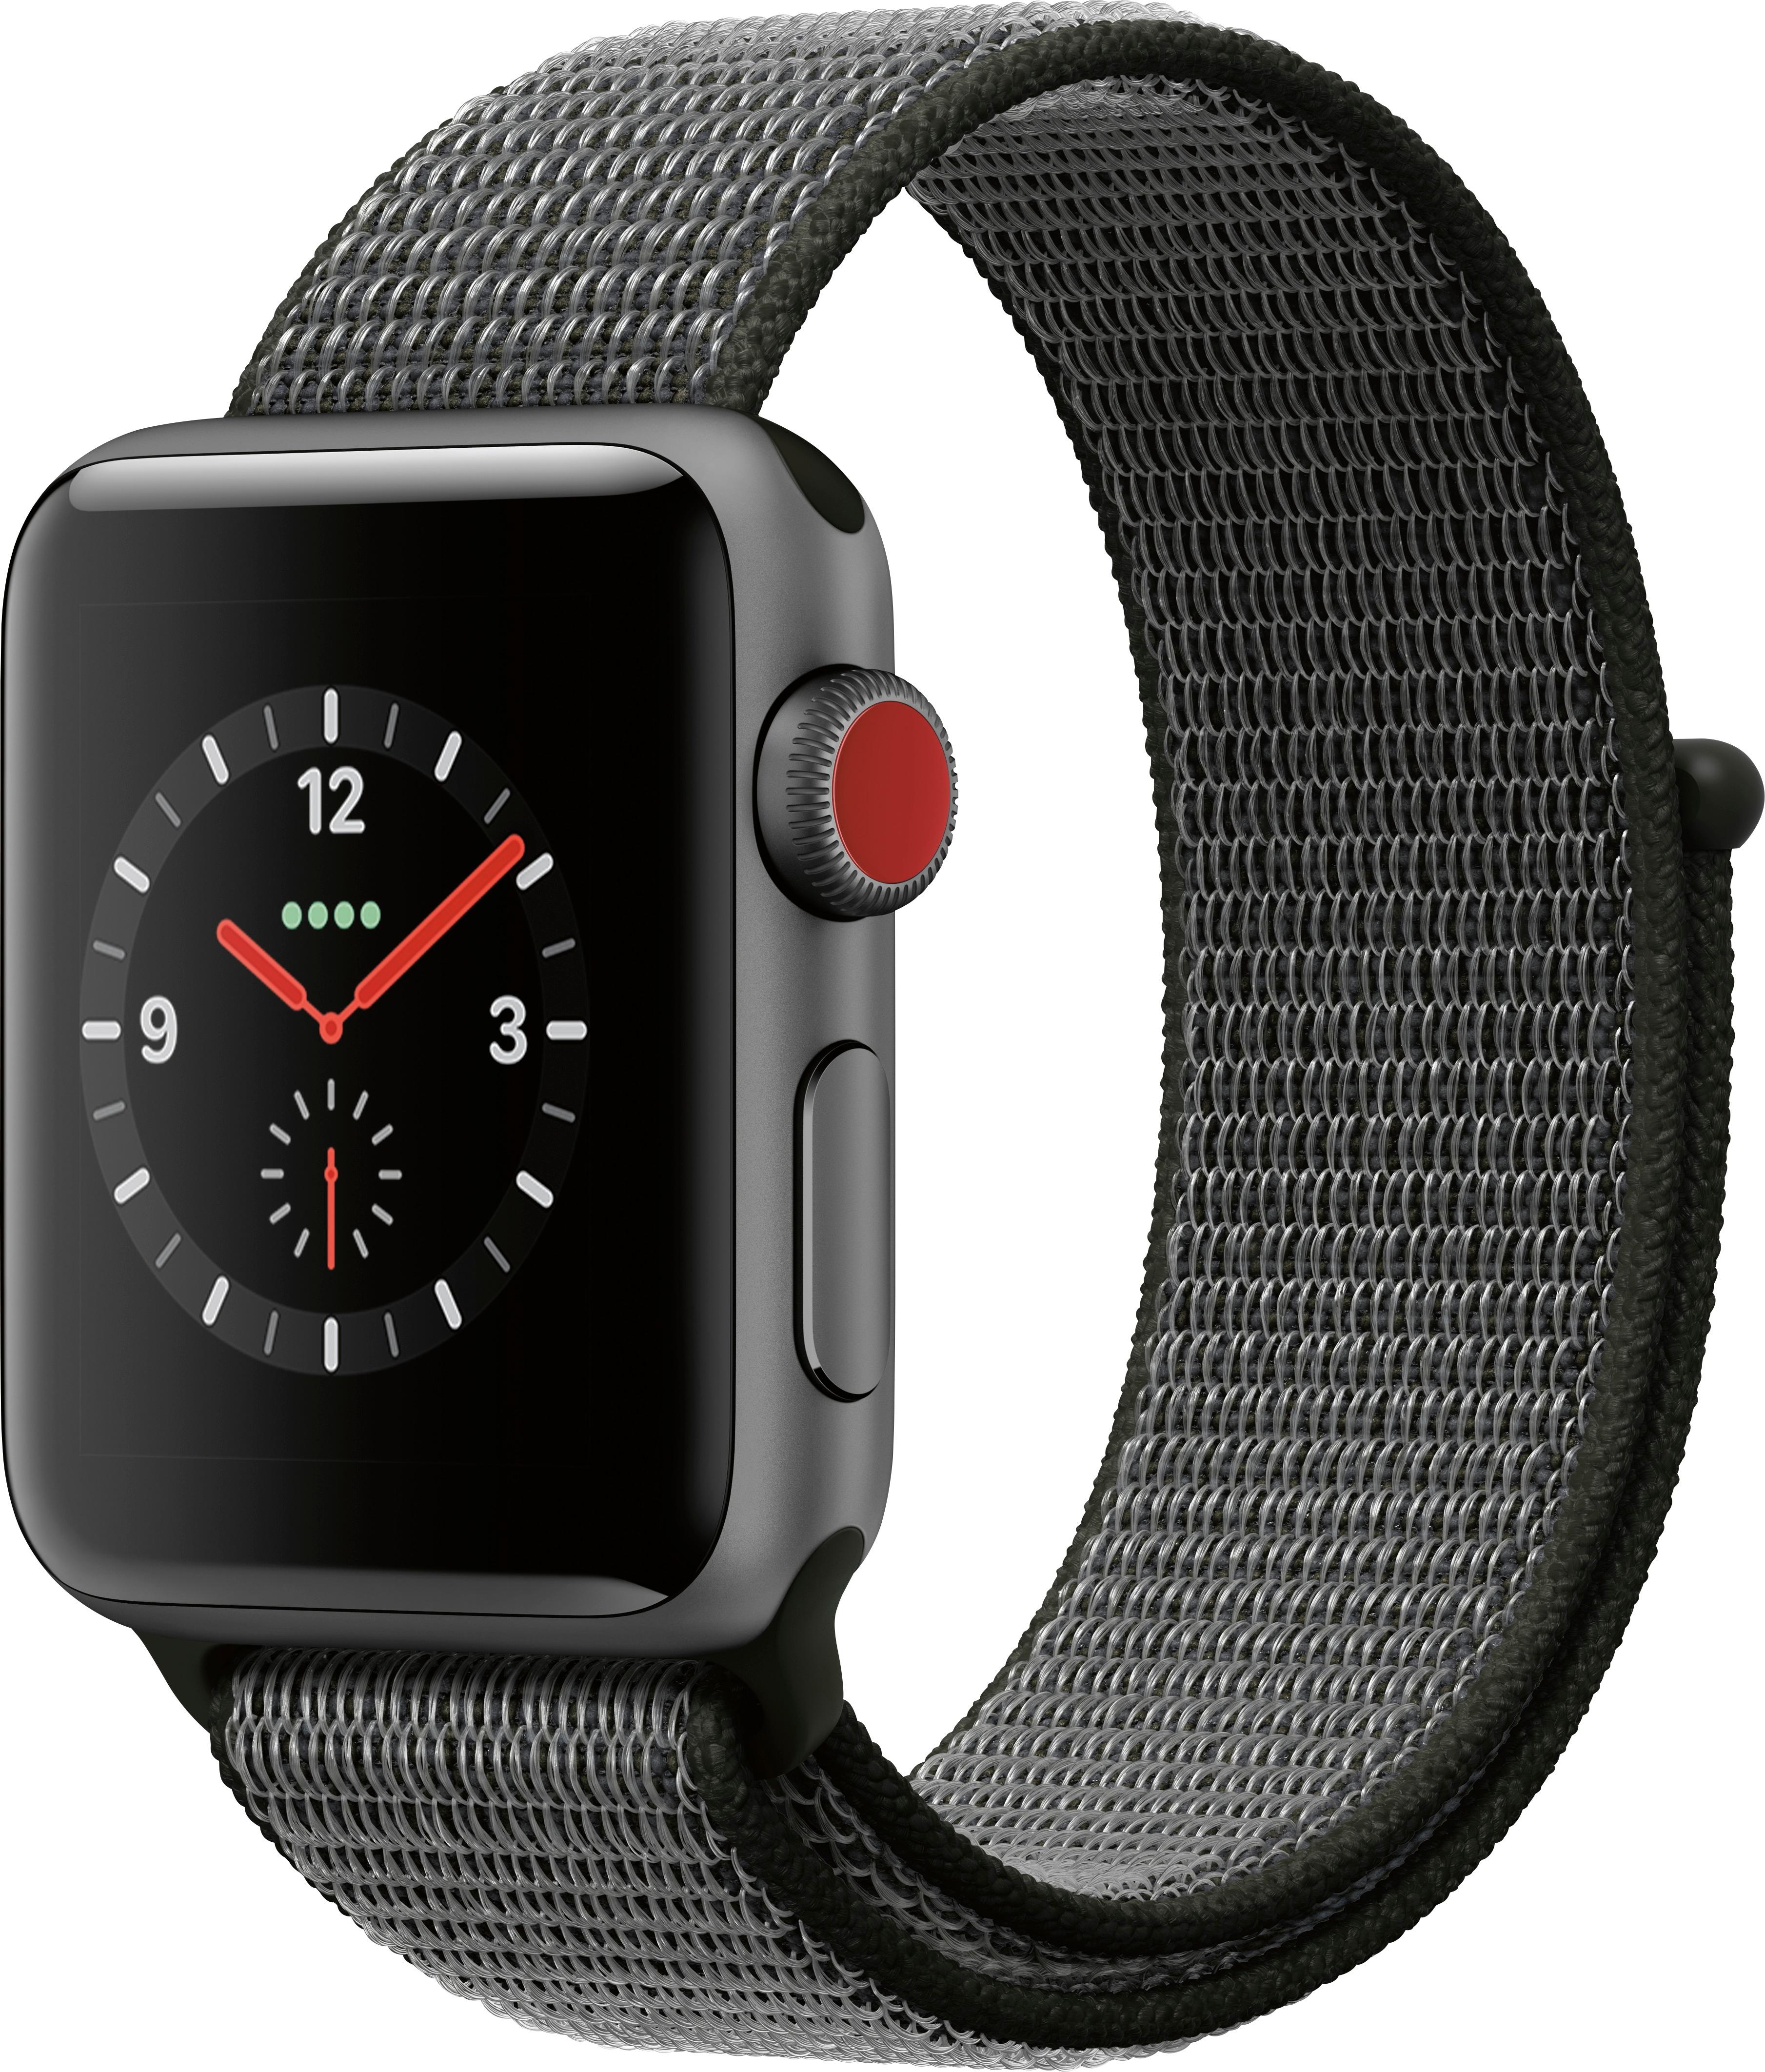 Angle View: Apple Watch Nike+ Series 3 (GPS + Cellular) 38mm Aluminum Case with Anthracite/Black Nike Sport Band - Space Gray Aluminum